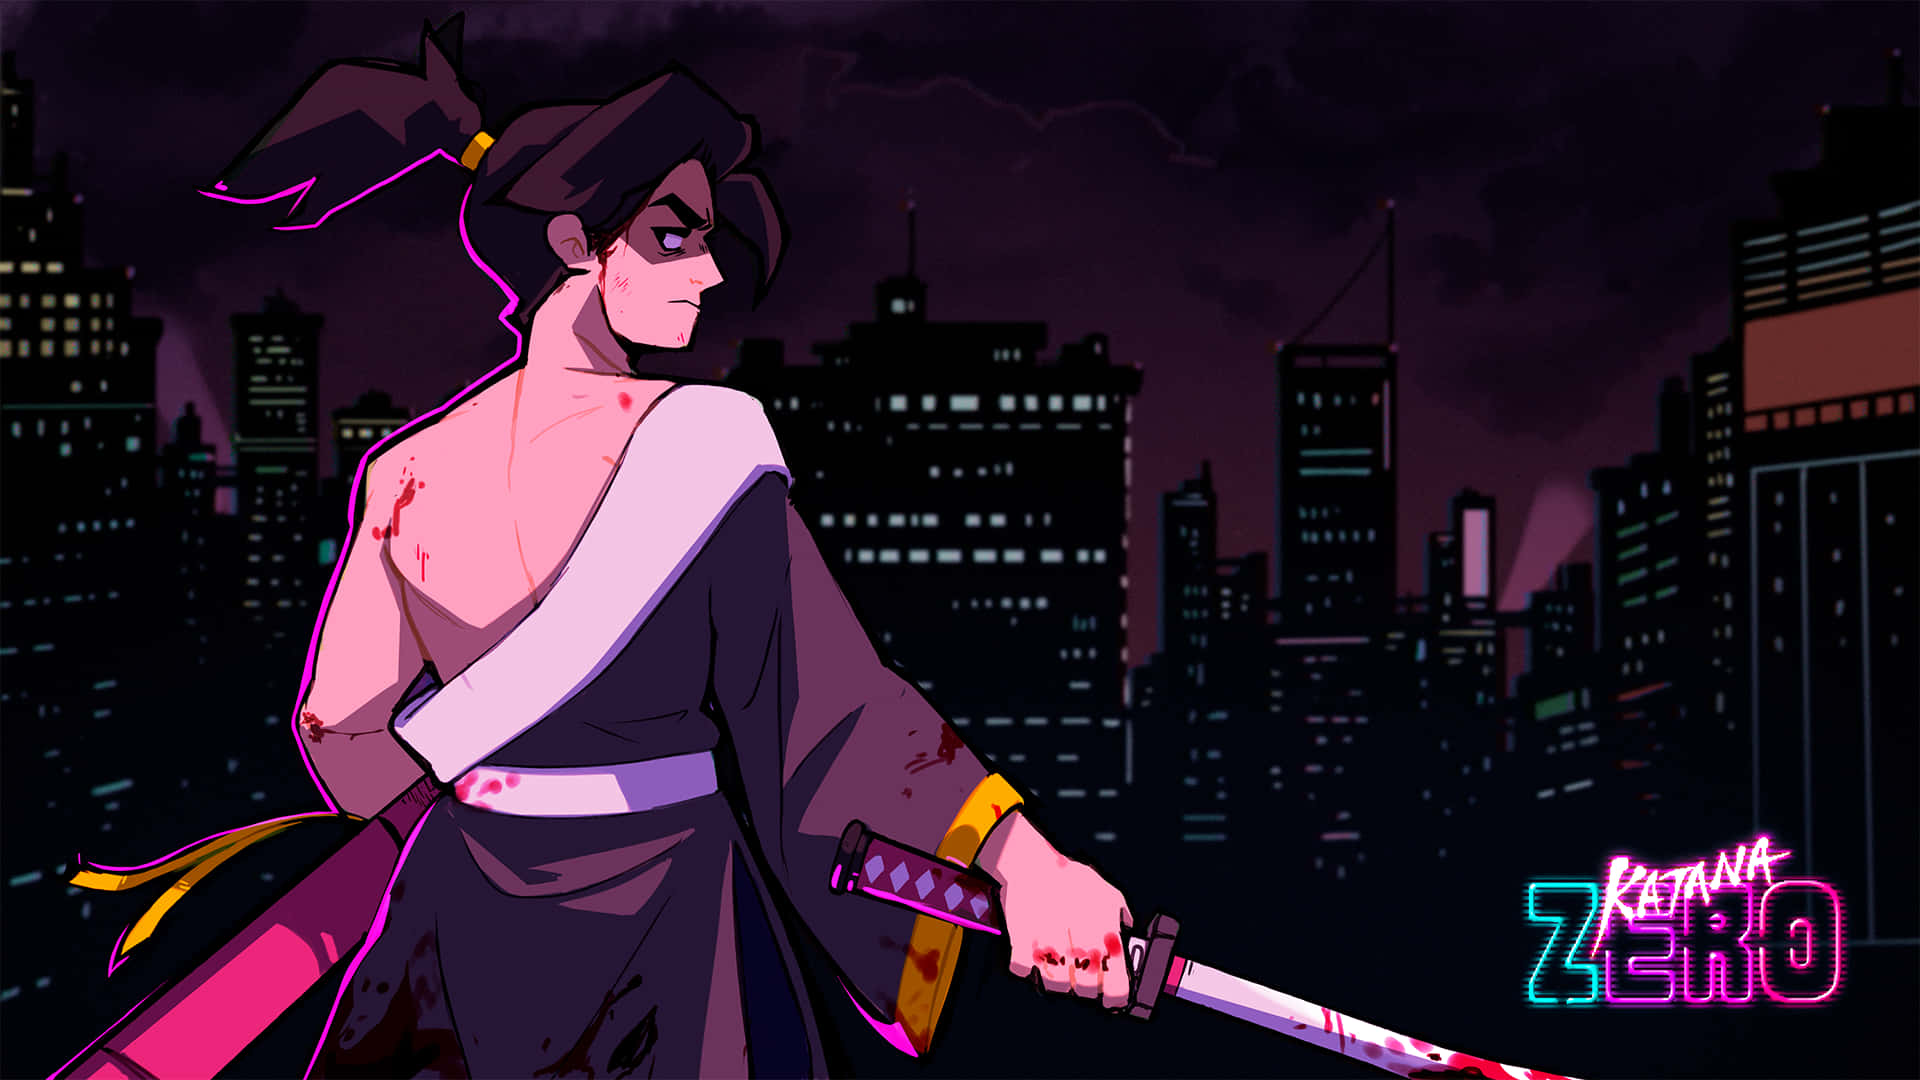 A Woman In A Kimono Holding A Sword In Front Of A City Wallpaper